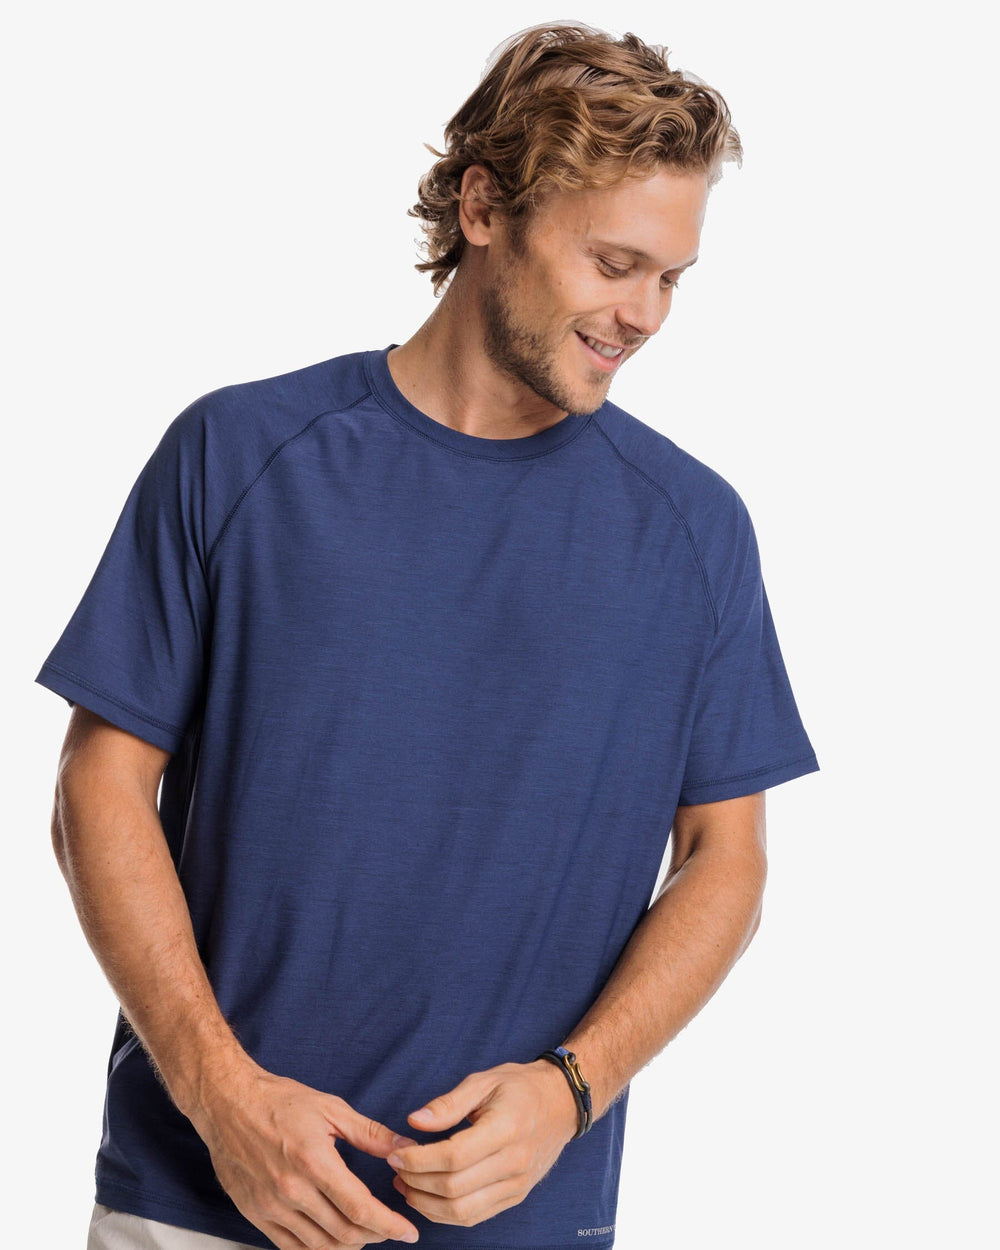 The front view of the Southern Tide brrr°®-illiant Performance Tee by Southern Tide - Nautical Navy